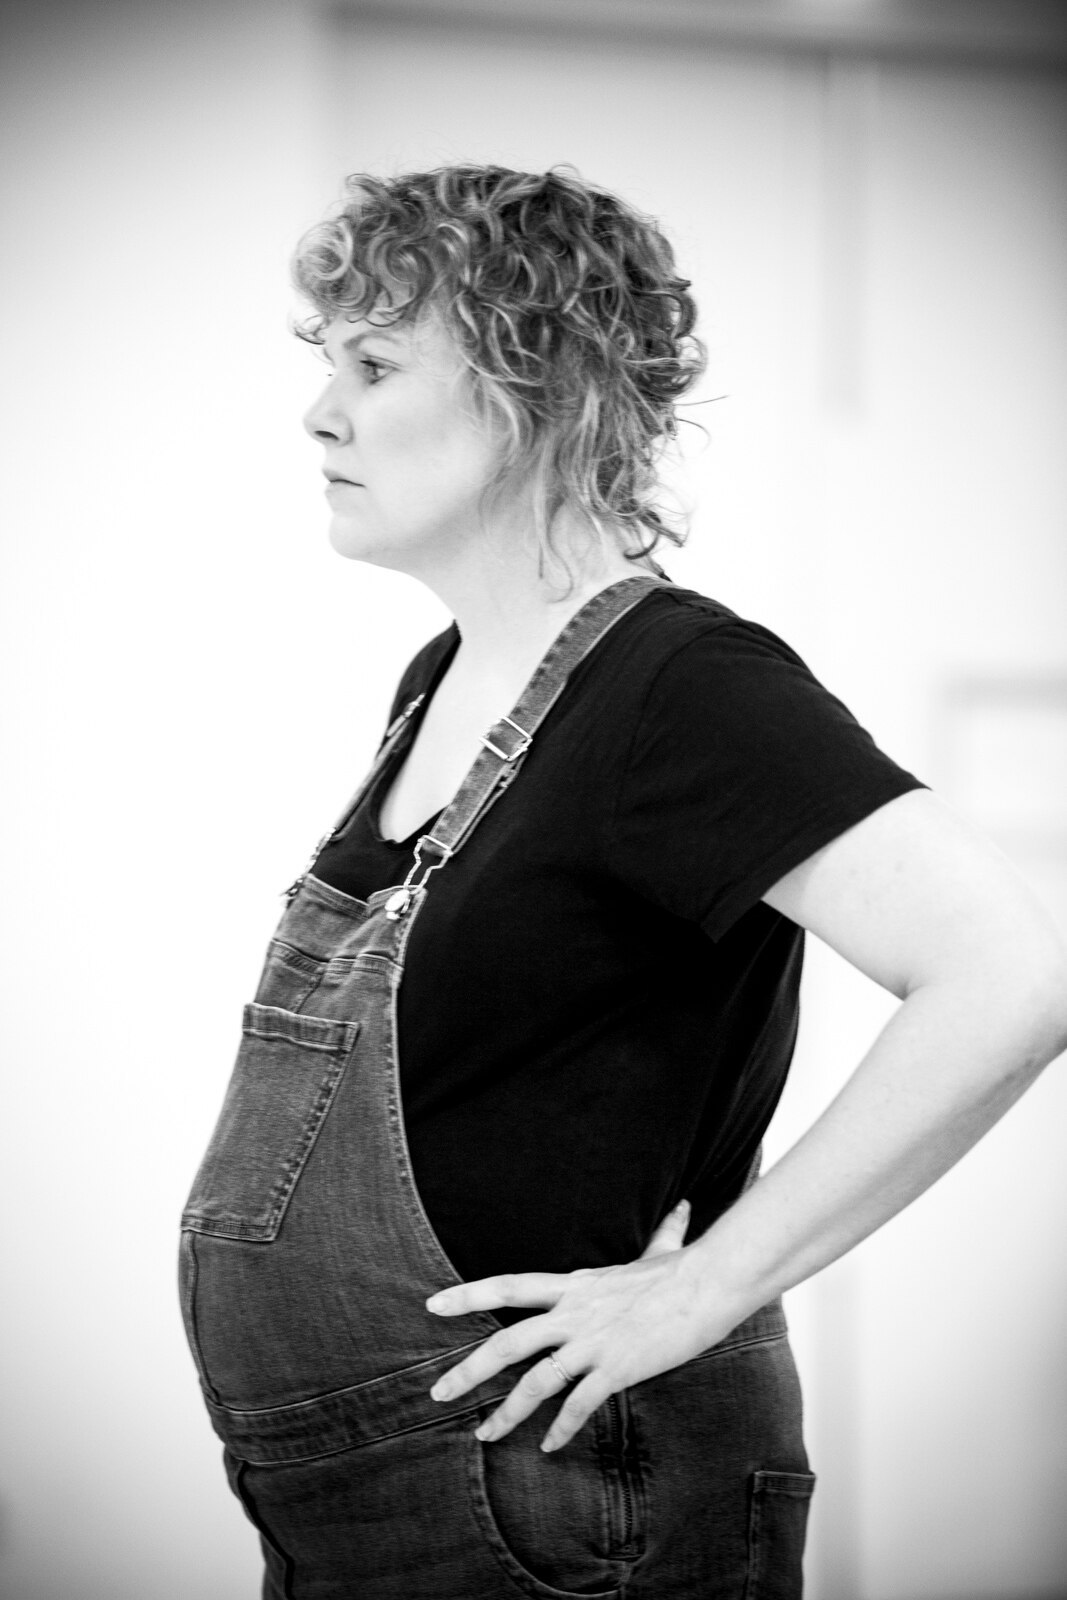 A B&W image of a pregnant, blonde, curly-haired woman, wearing a black shirt and overalls, her hands on her hips